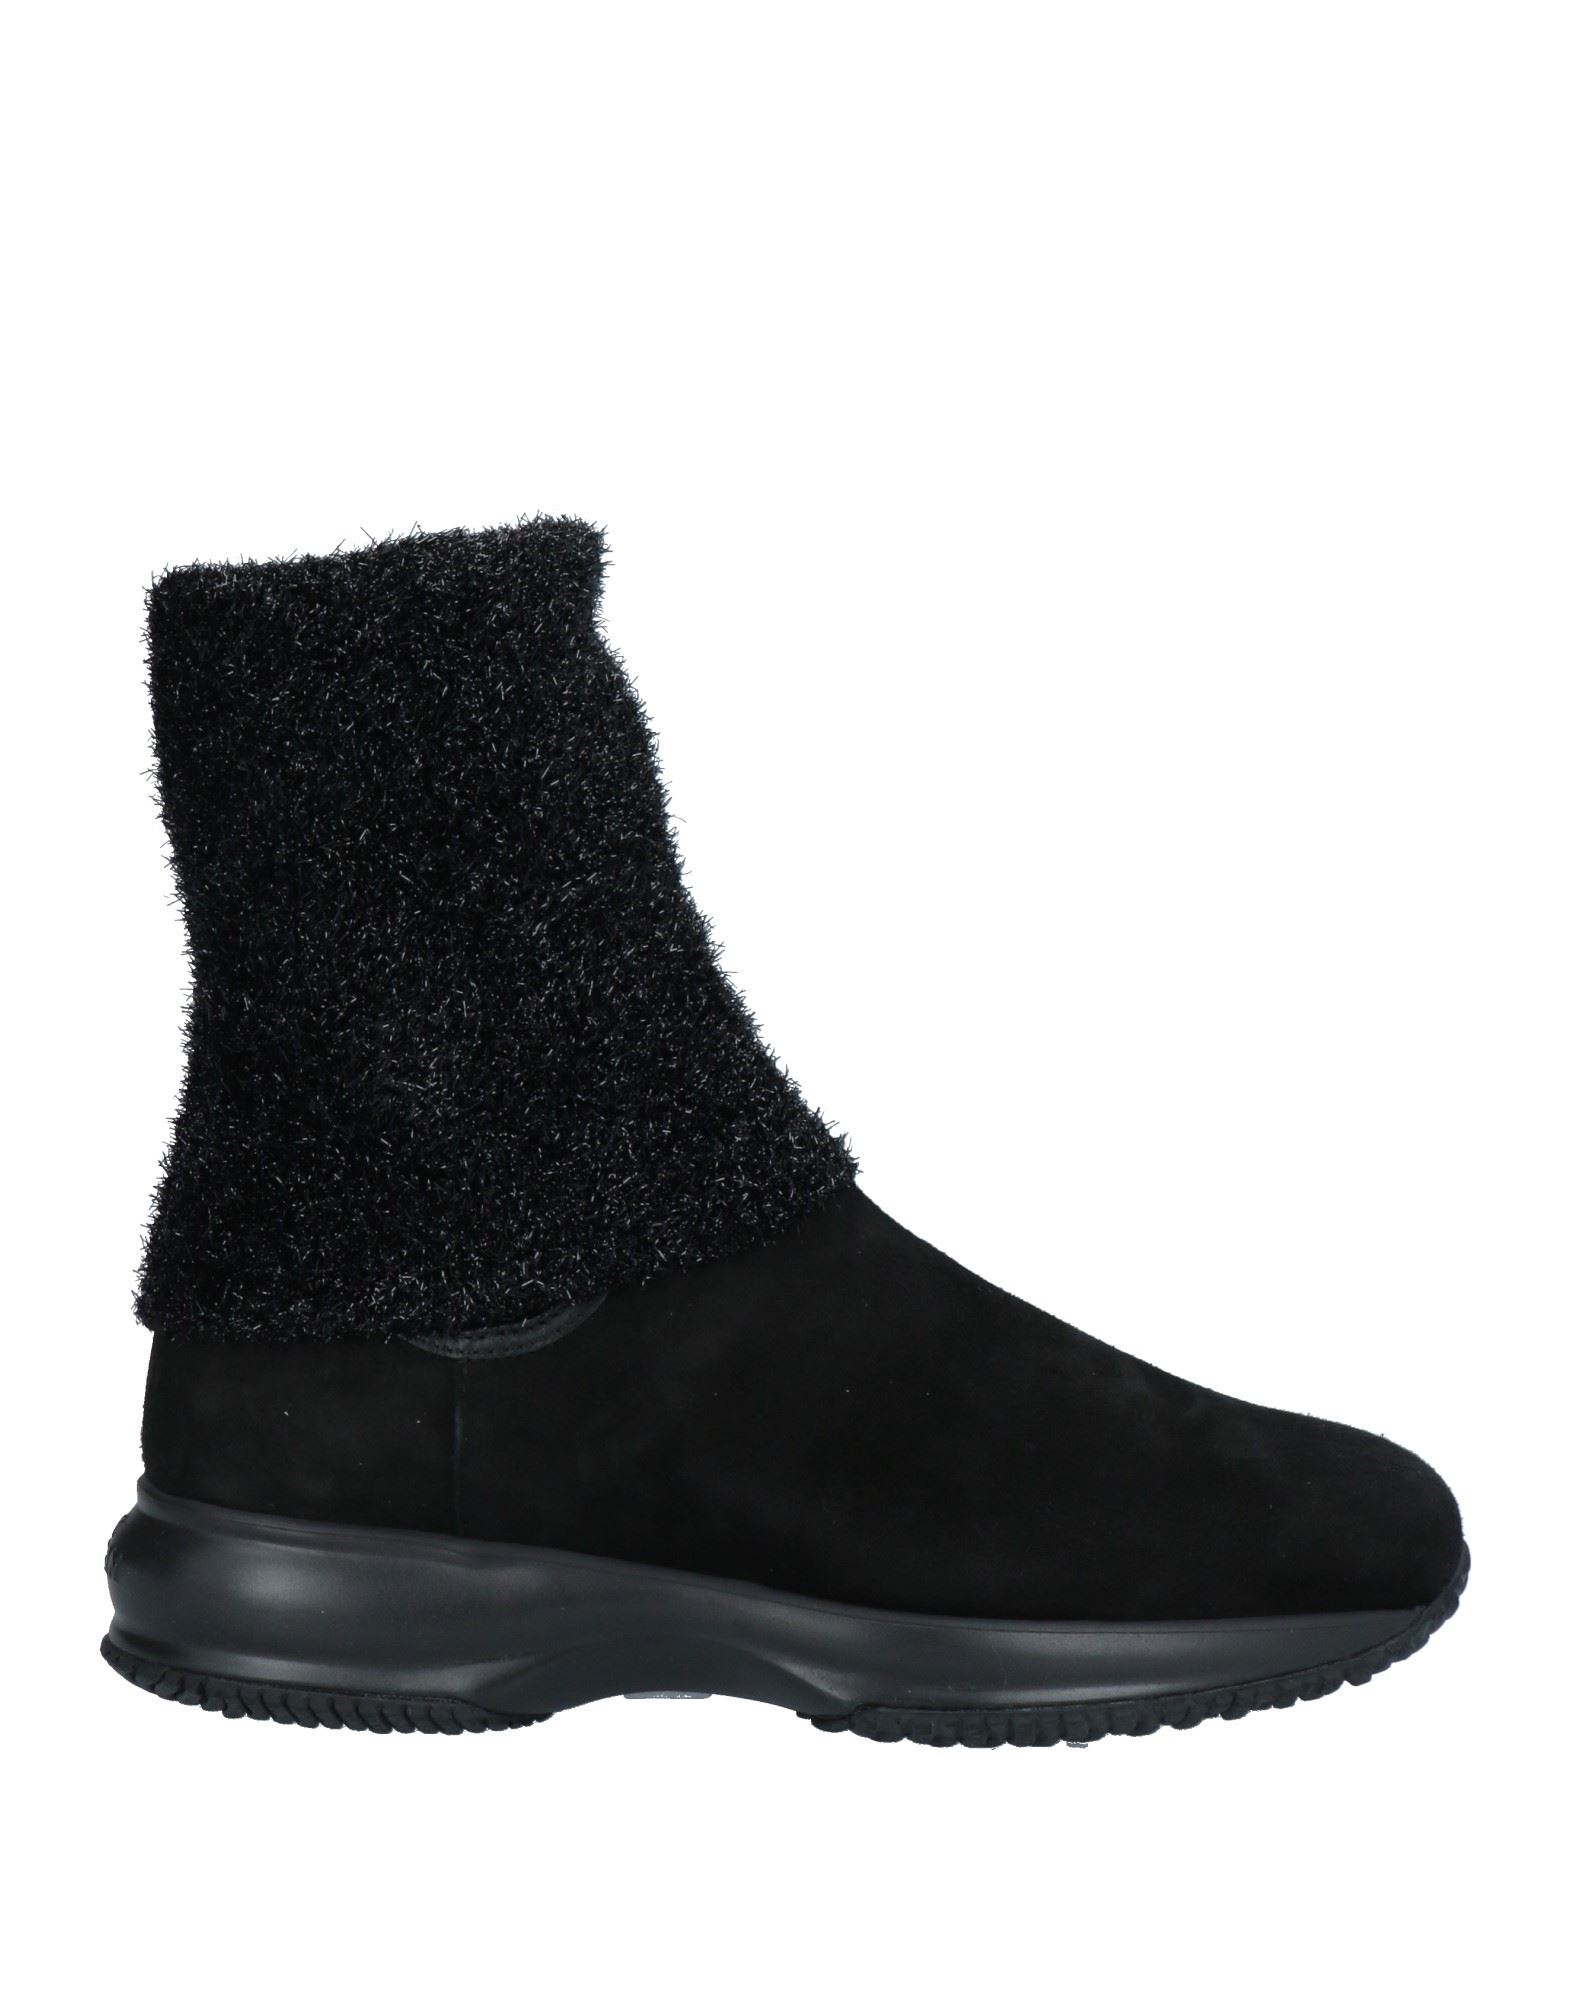 Hogan Ankle Boots In Black